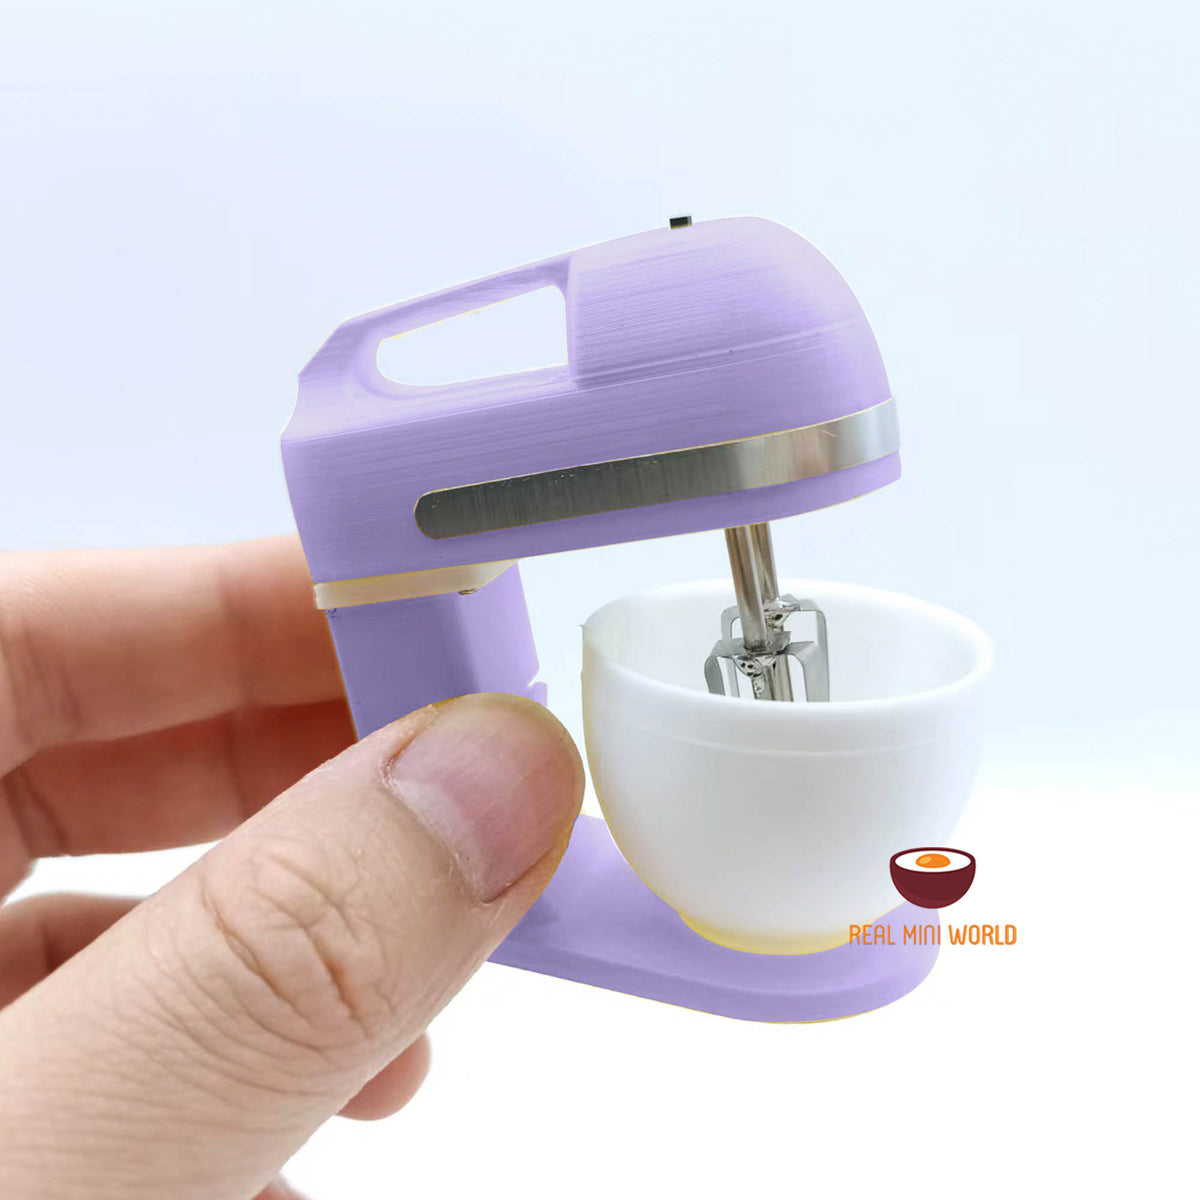 Miniature REAL Working Mixer 2in1 Hand and Stand Mixer in Pastel